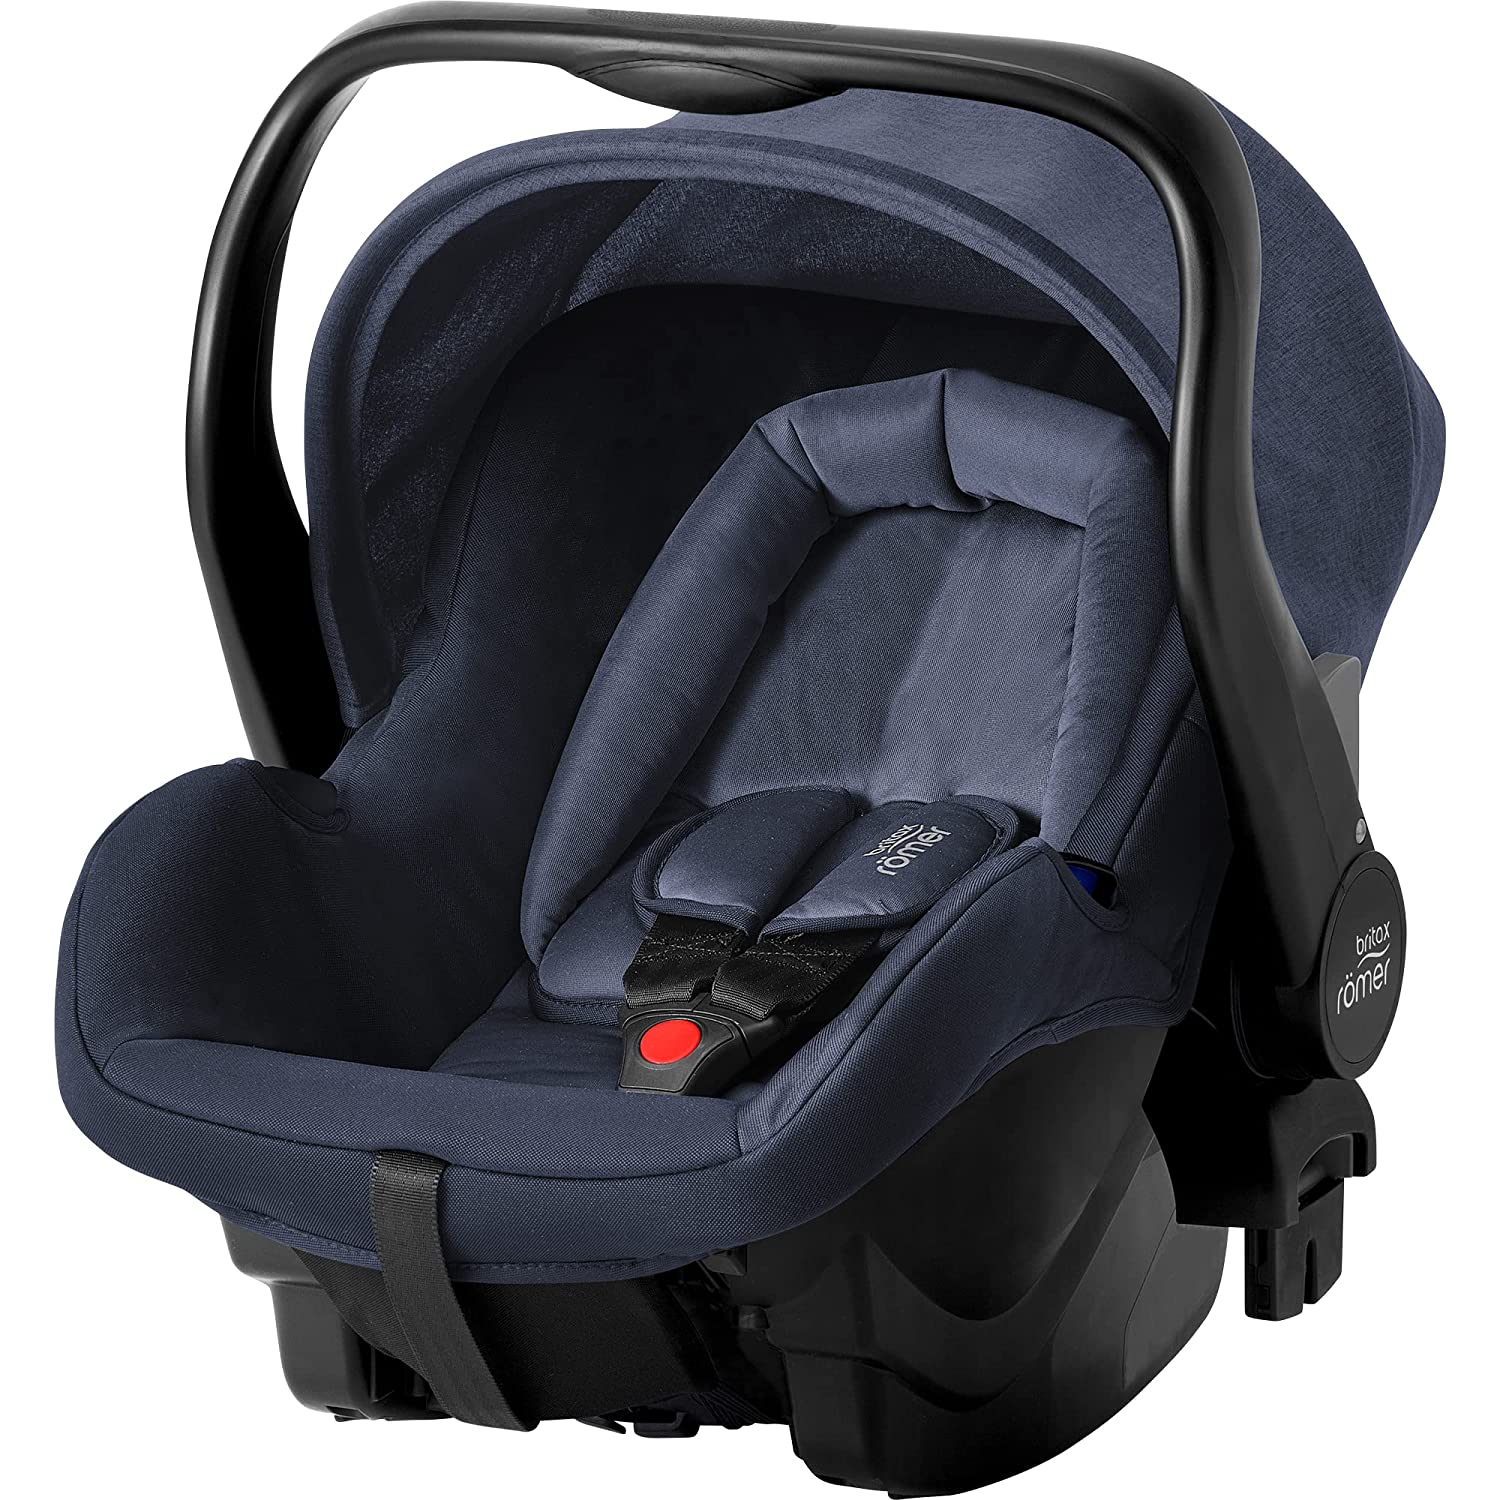 Britax Romer Britax Römer Primo Baby Car Seat Compatible with Primo Base, from Birth to 12/15 Months (13 kg) Group 0+, Navy Ink